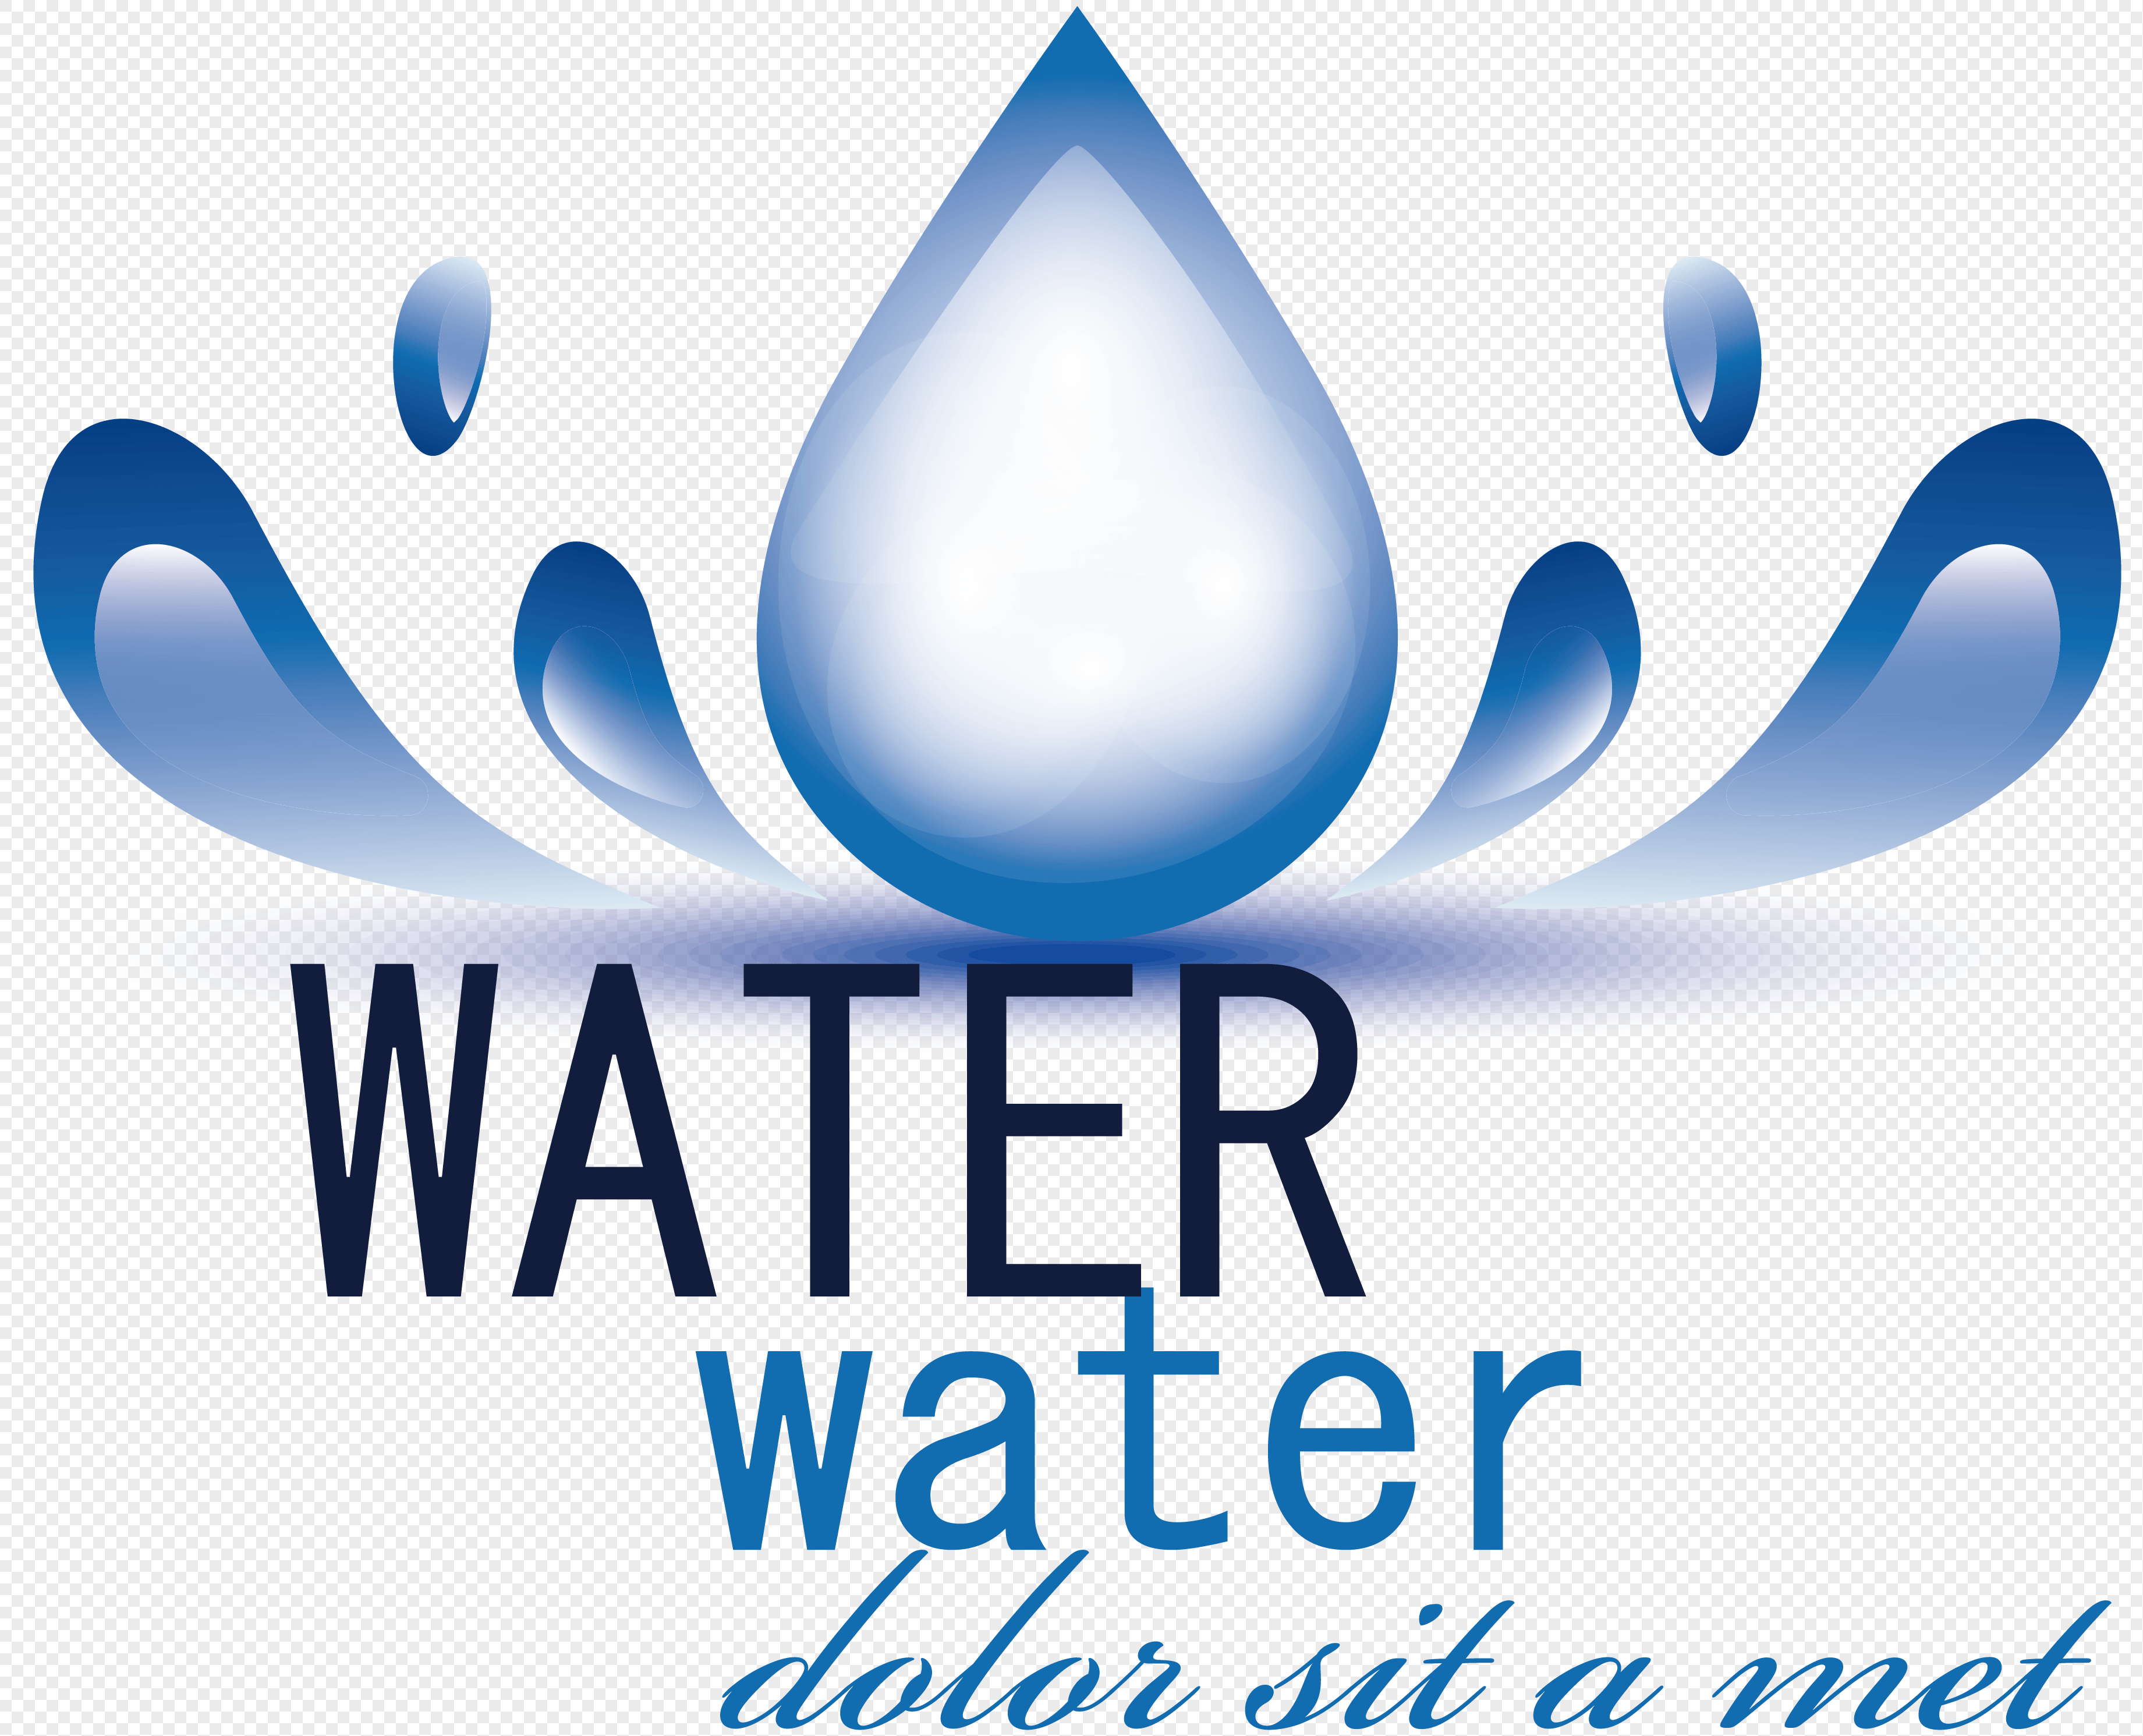 Water Drop Logo - Design elements of hand drawn water drop logo png image_picture free ...